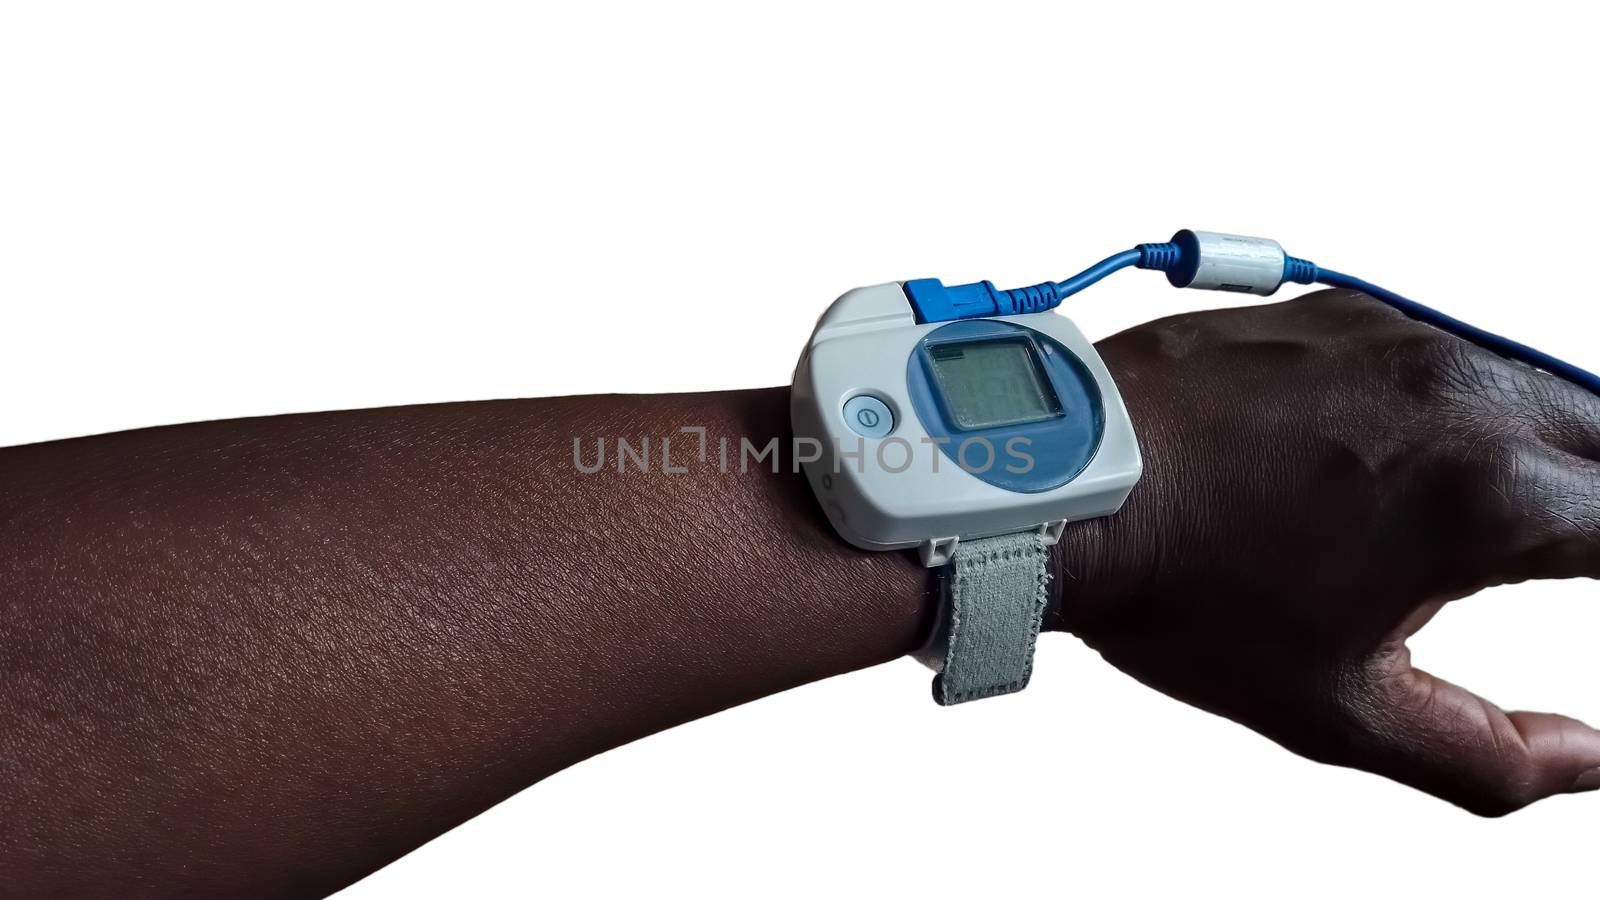 Sleep pulse oximeter on the arm of a black man, on a white background by magicbones